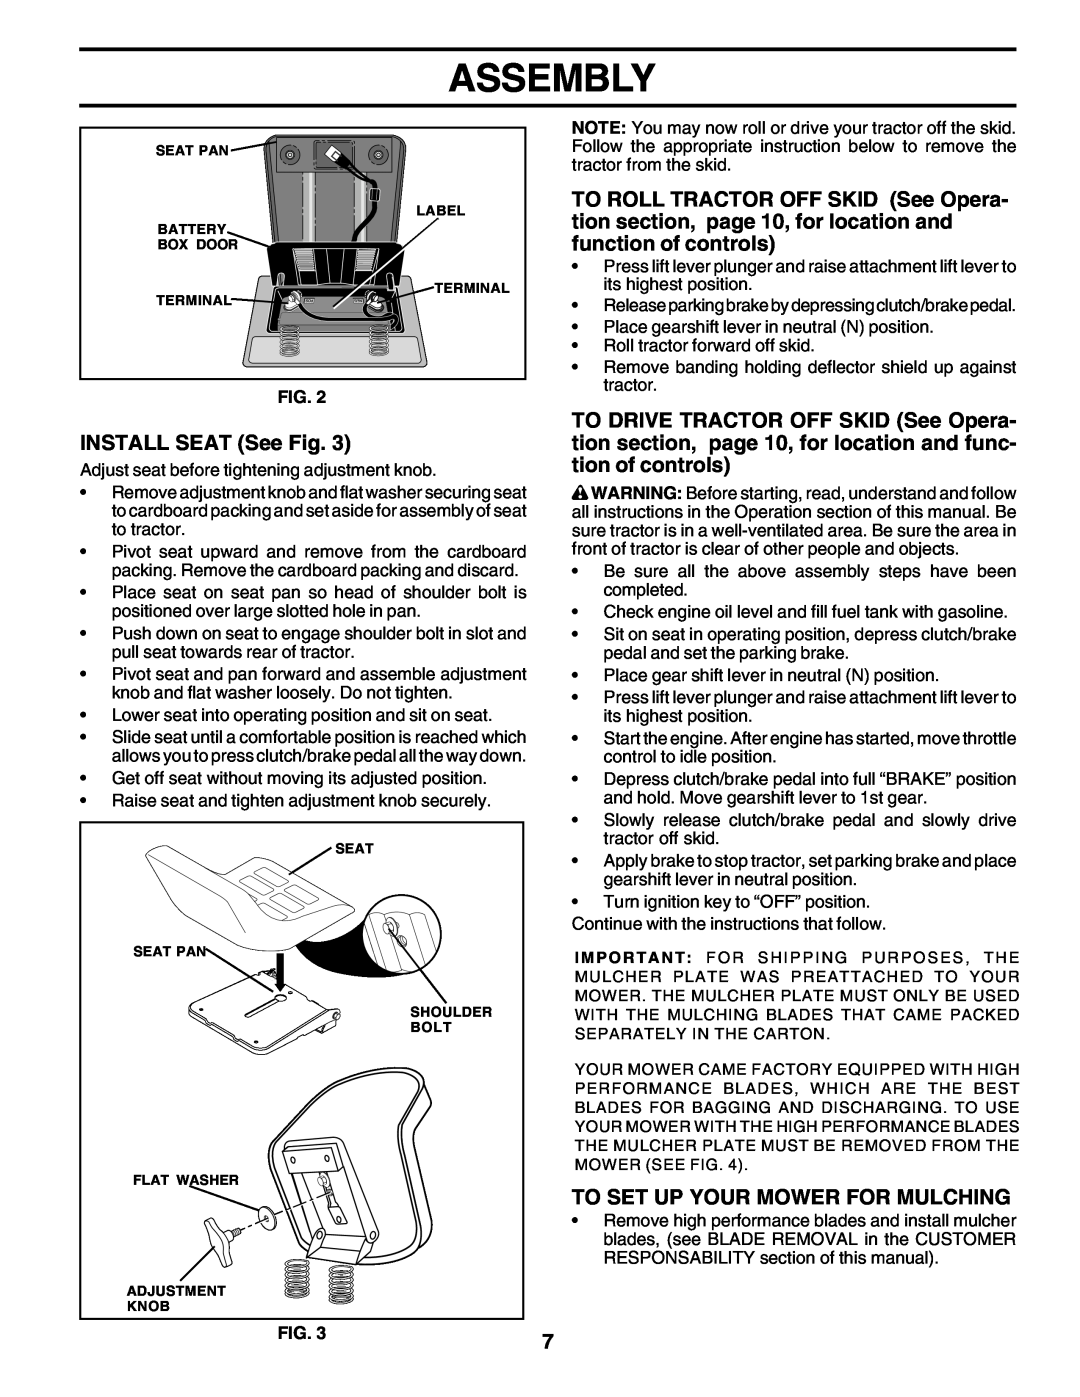 Poulan 180198 owner manual INSTALL SEAT See Fig, To Set Up Your Mower For Mulching, Assembly 